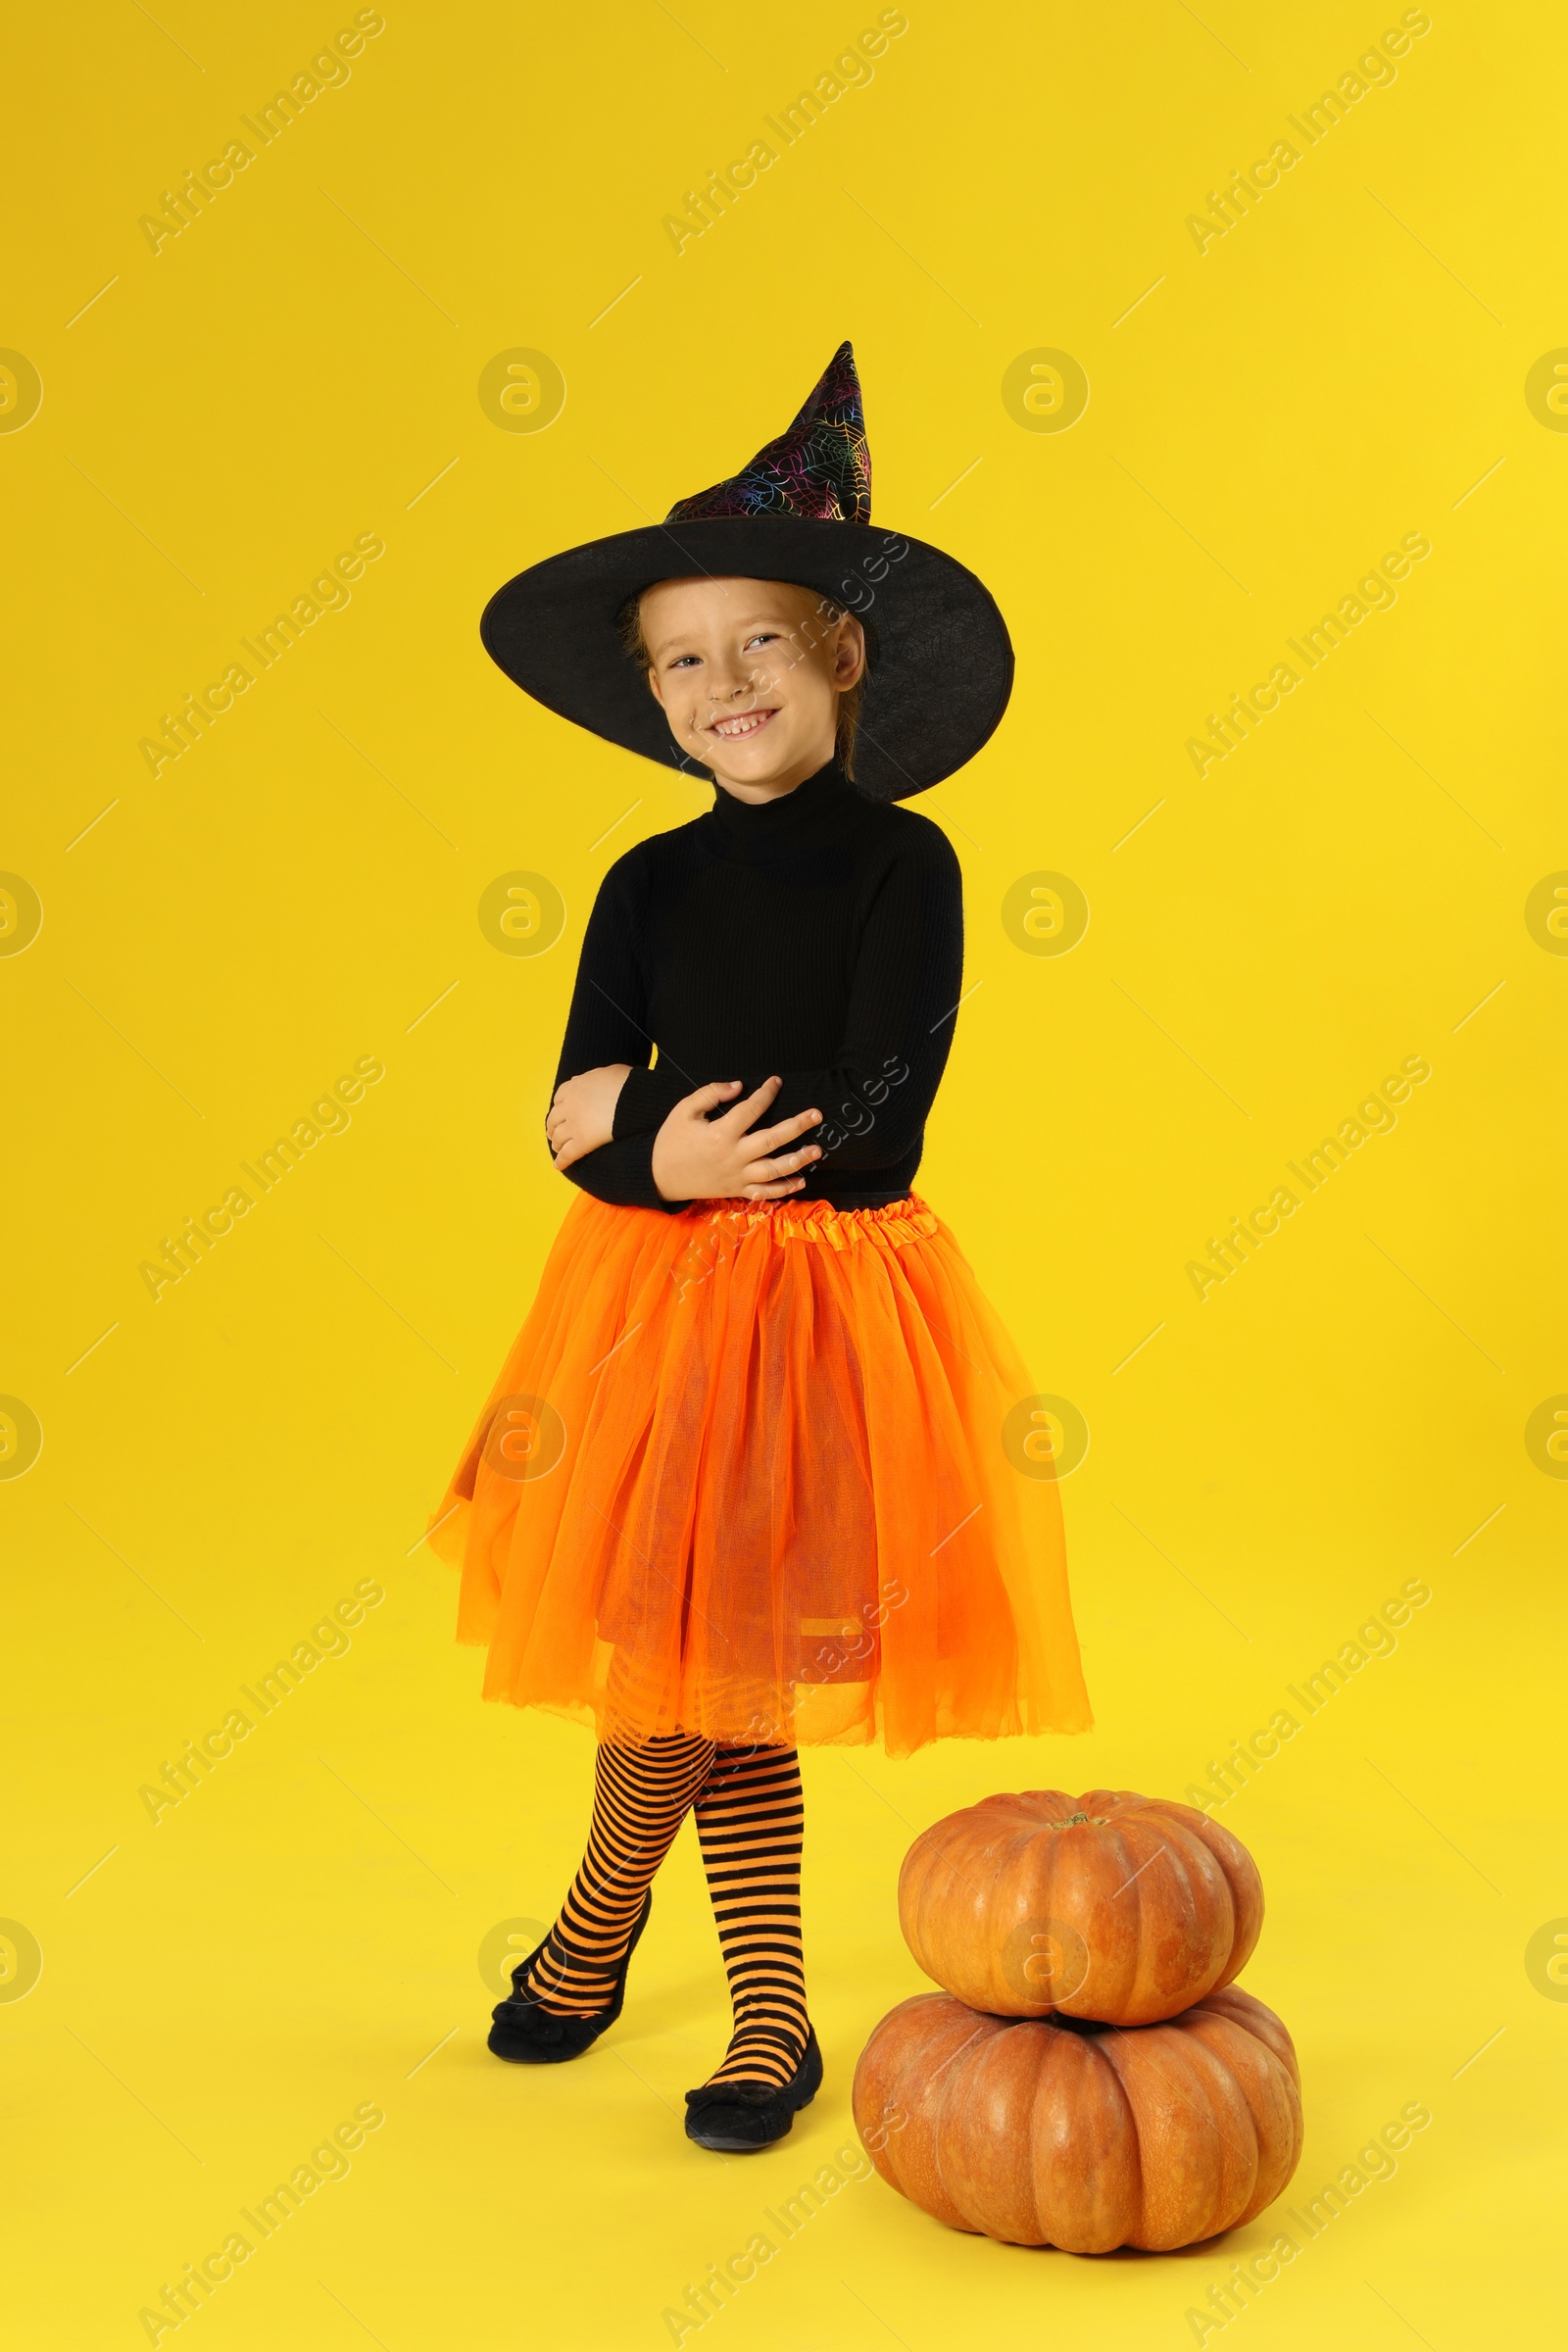 Photo of Cute little girl with pumpkins wearing Halloween costume on yellow background